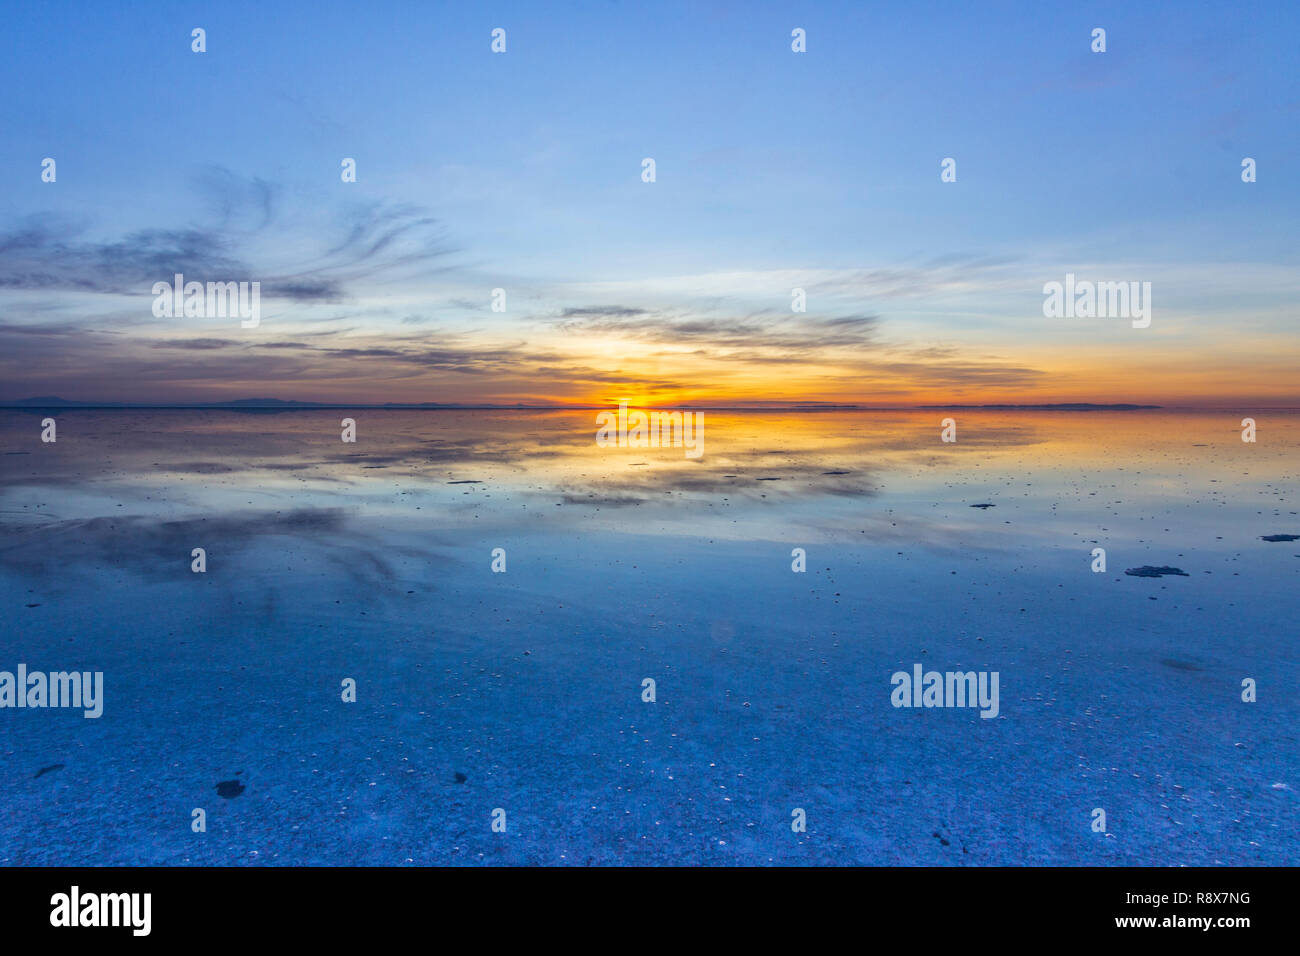 Uyuni reflections. One of the most amazing things that a photographer ...